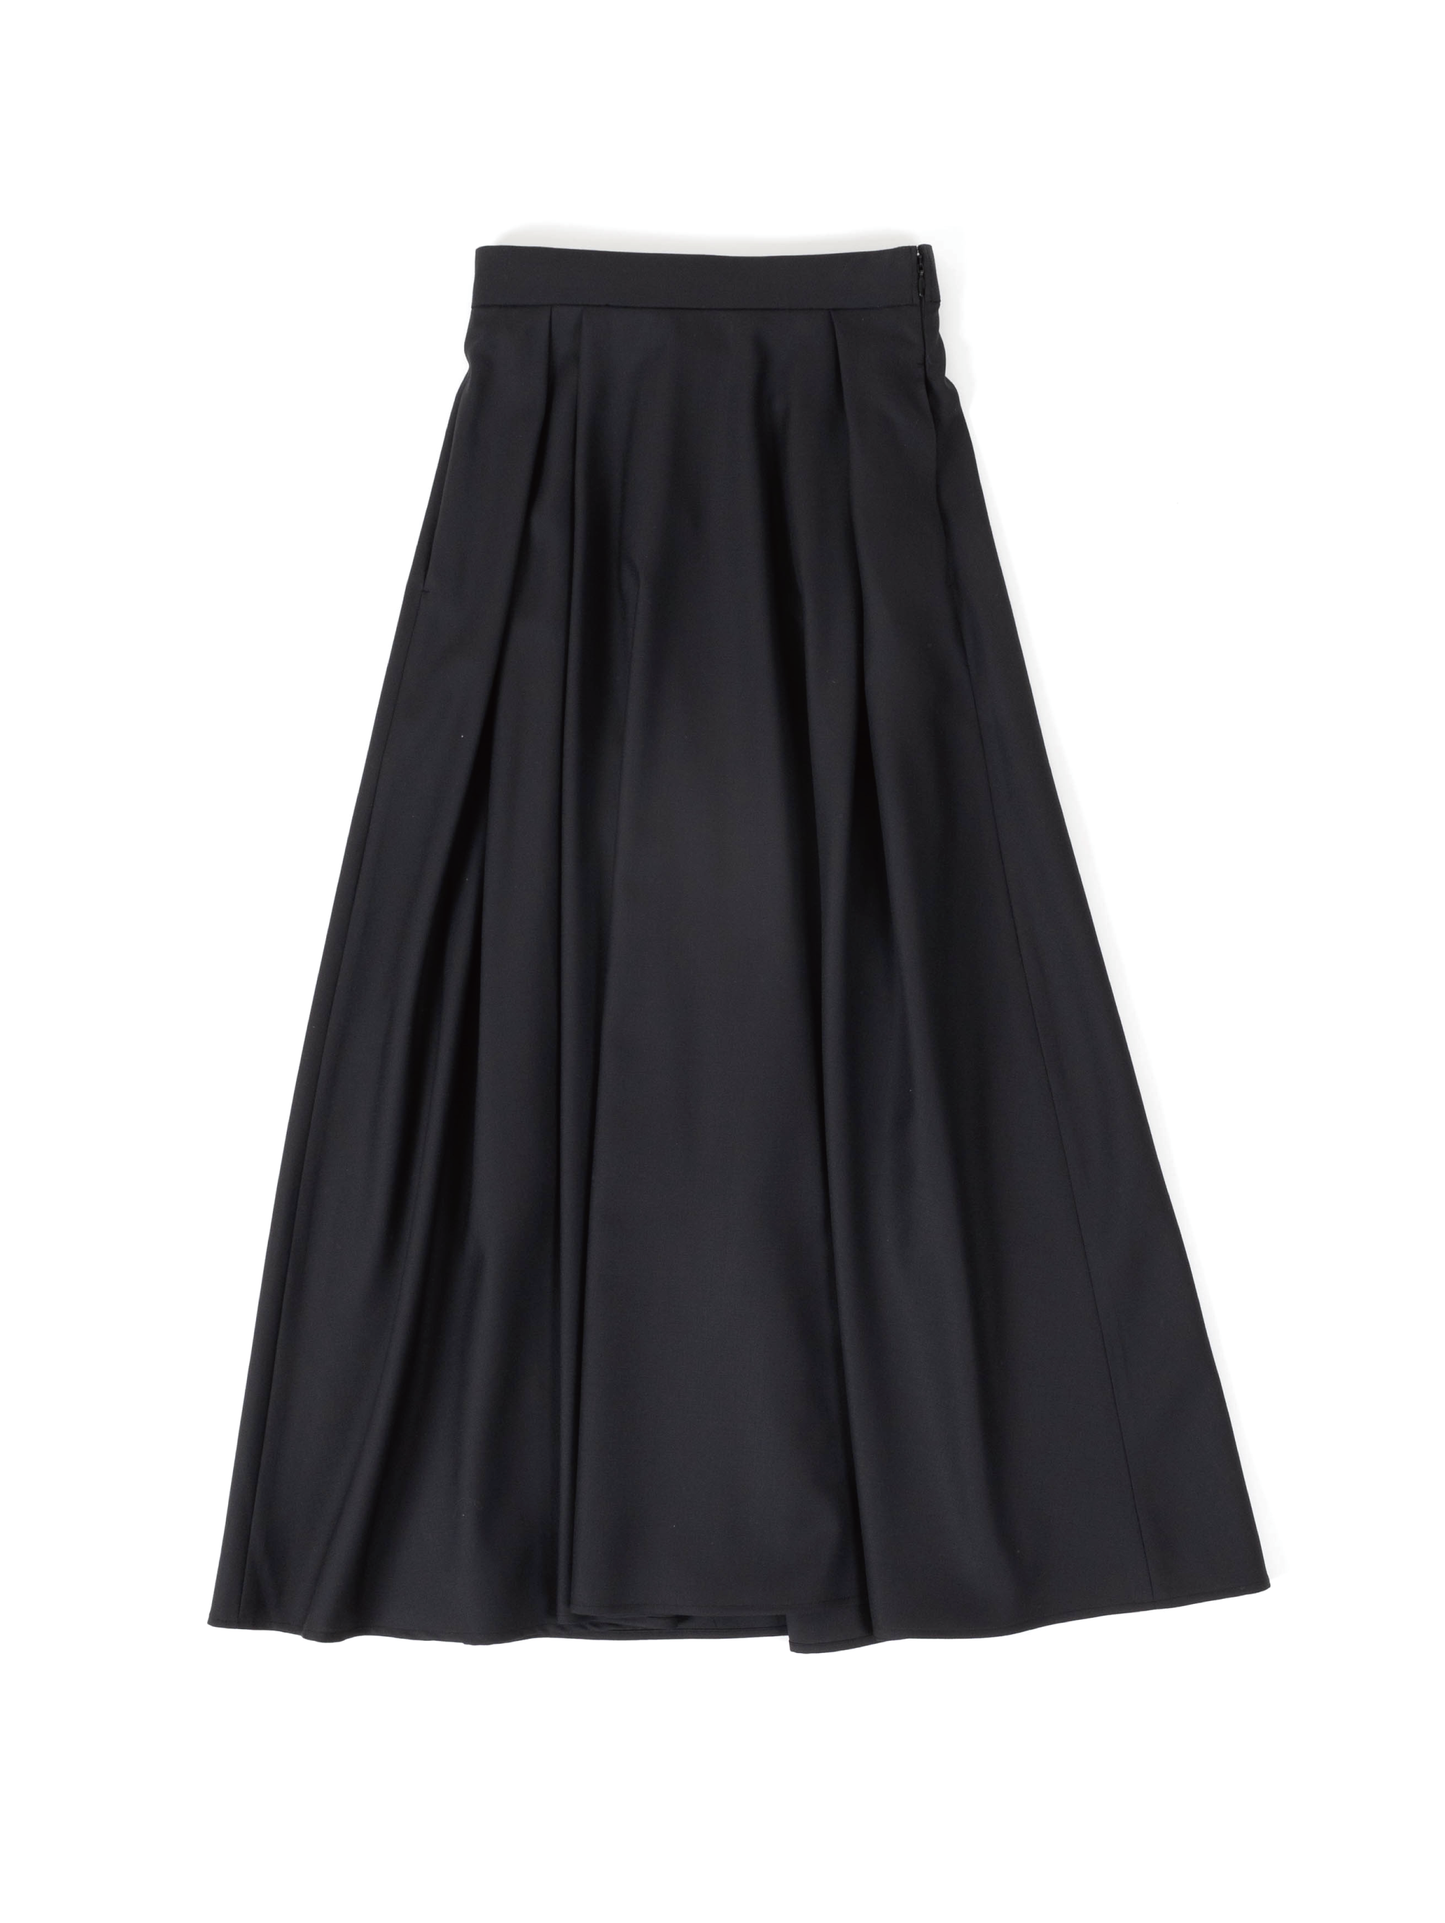 WORSTED WOOL SKIRTS｜BLACK NAVY